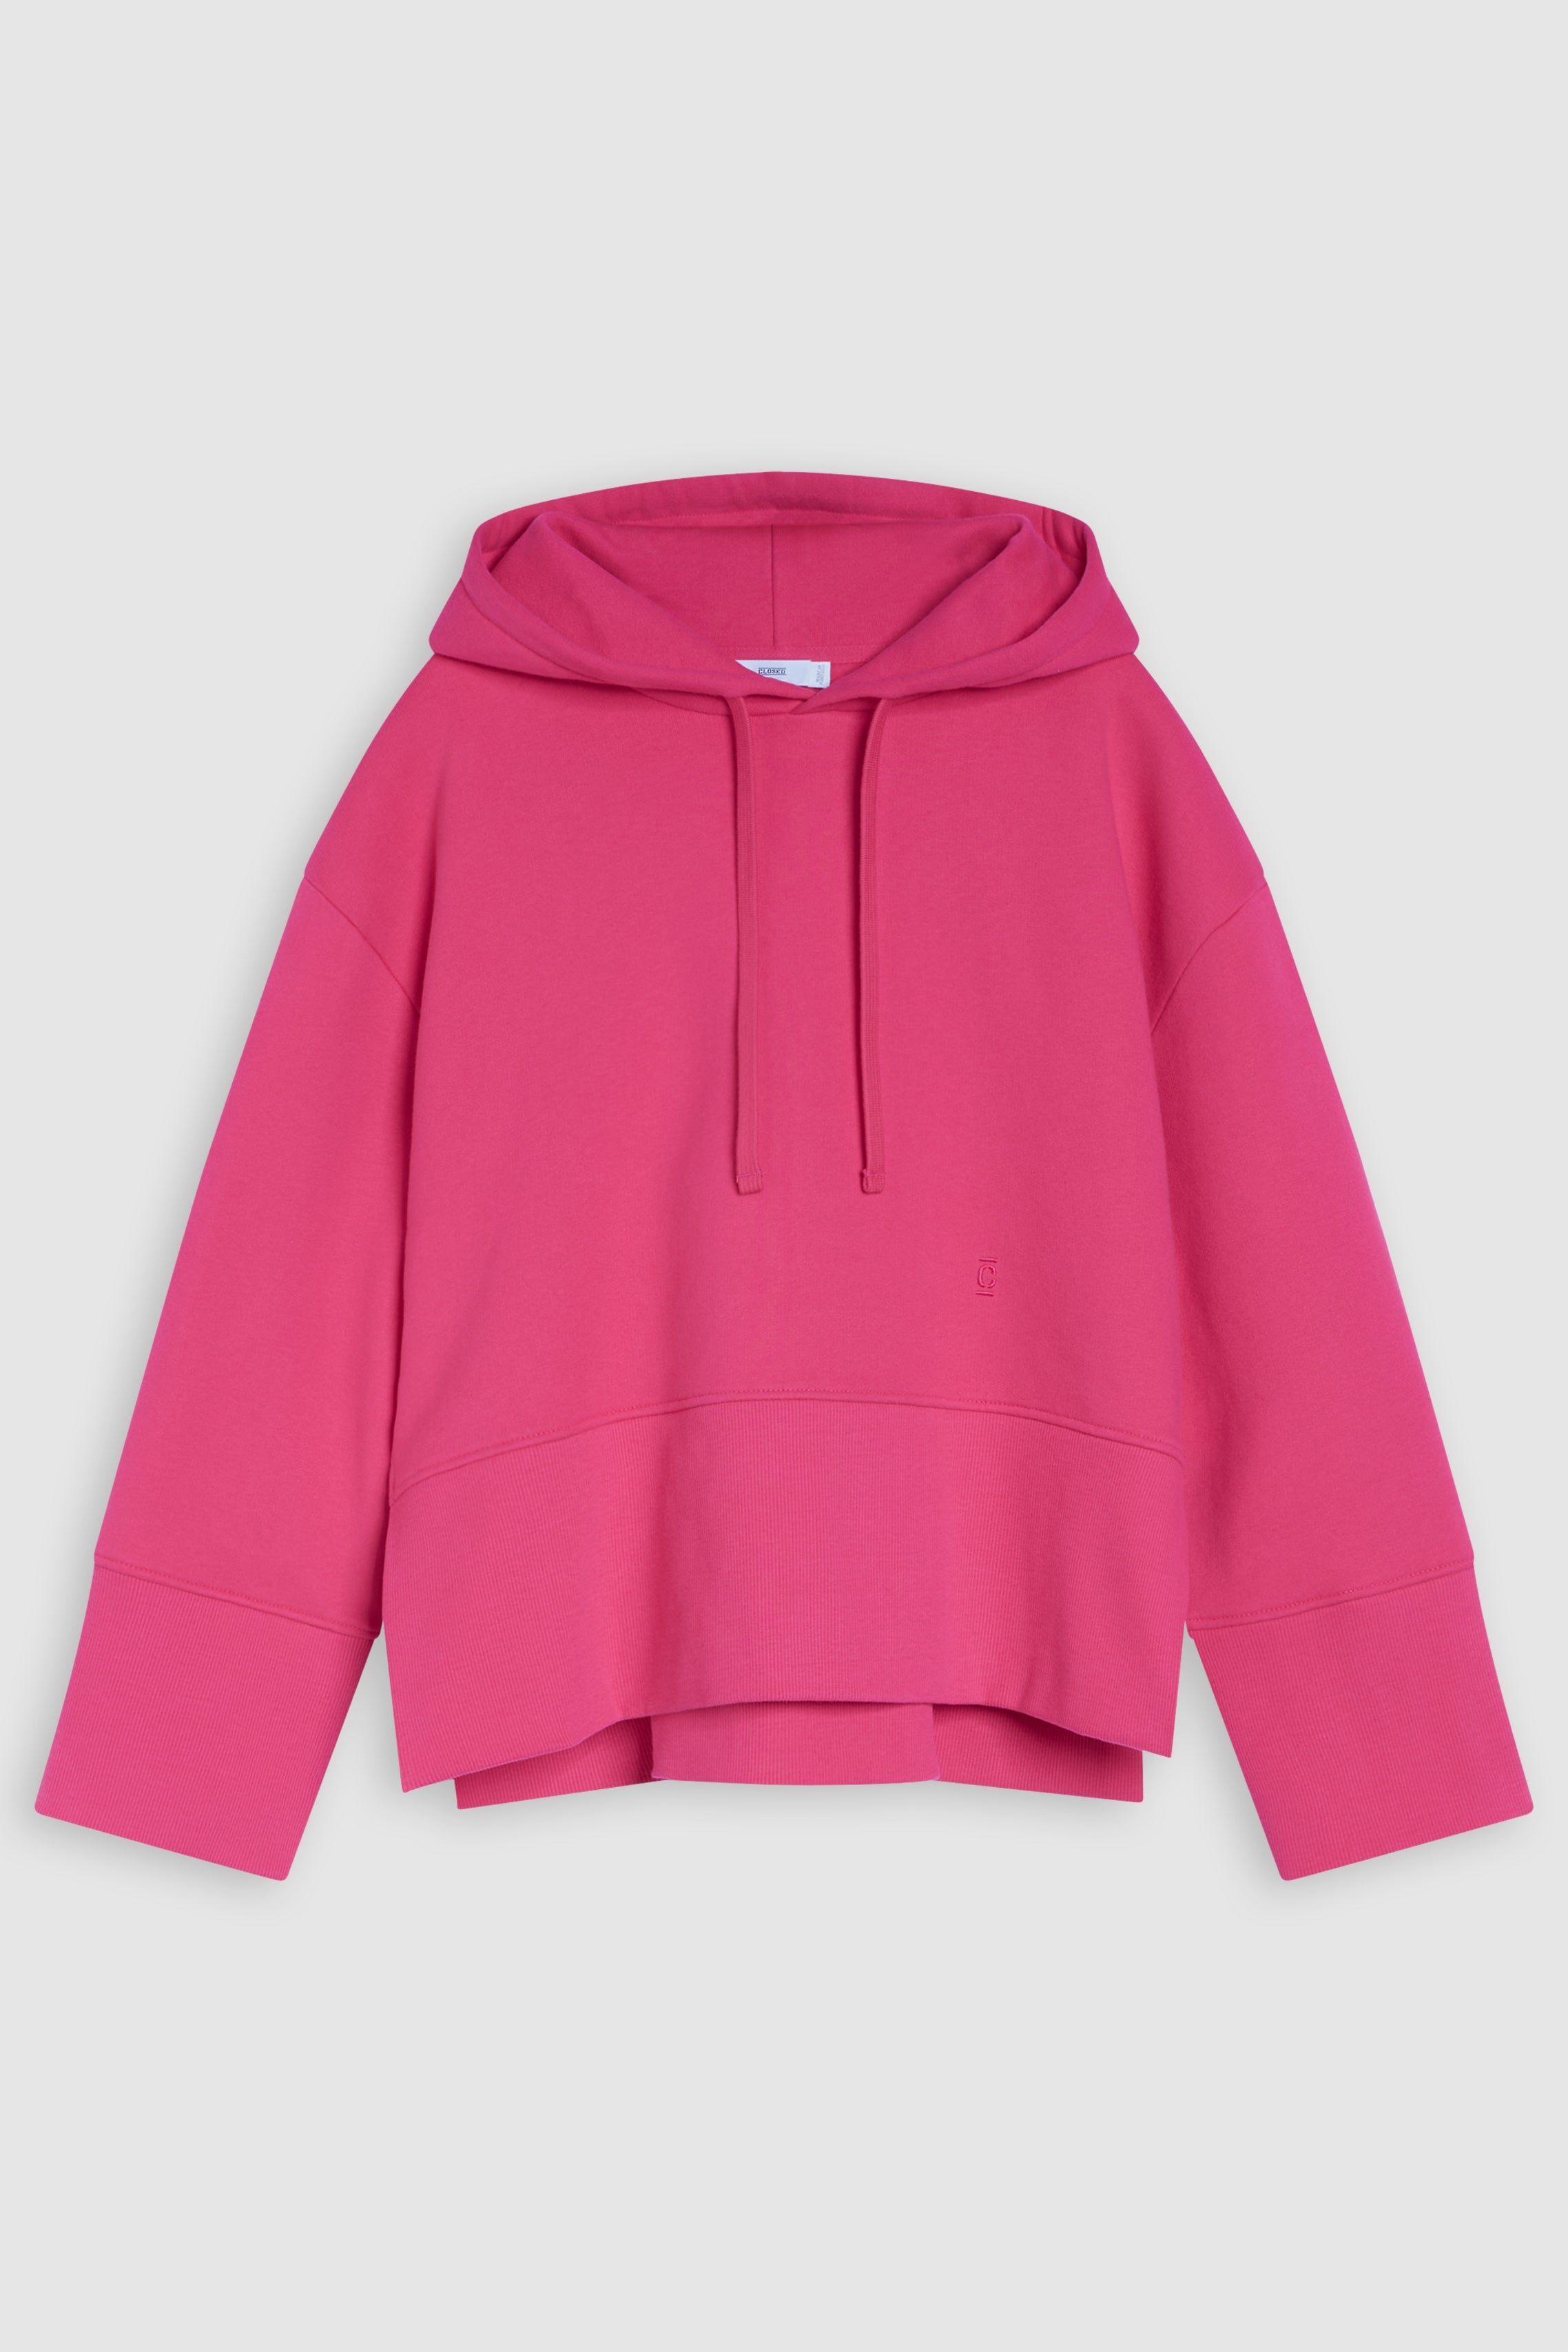 CLOSED-CROPPED HOODY-Strick-Outlet-Sale